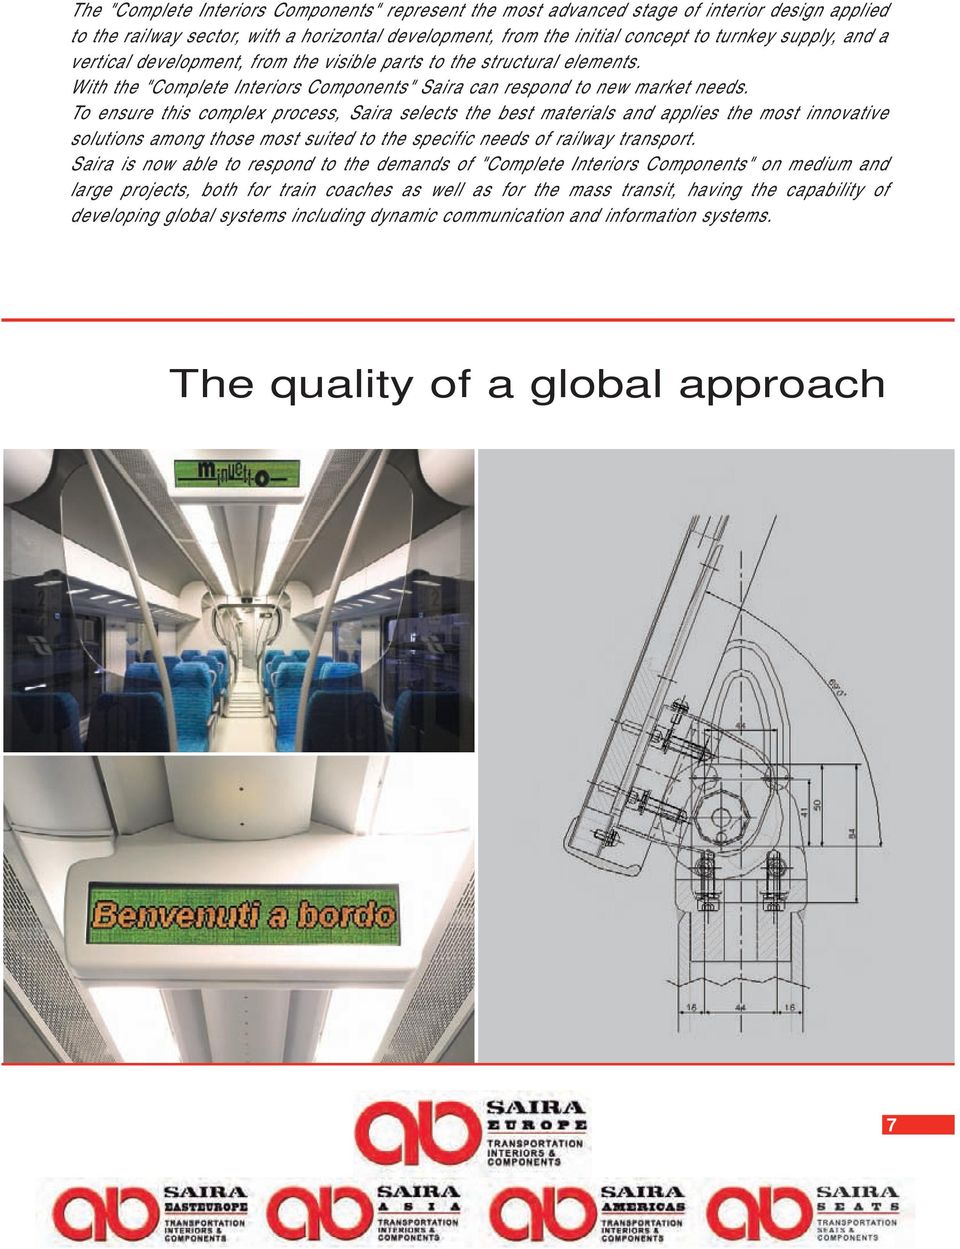 To ensure this complex process, Saira selects the best materials and applies the most innovative solutions among those most suited to the specific needs of railway transport.